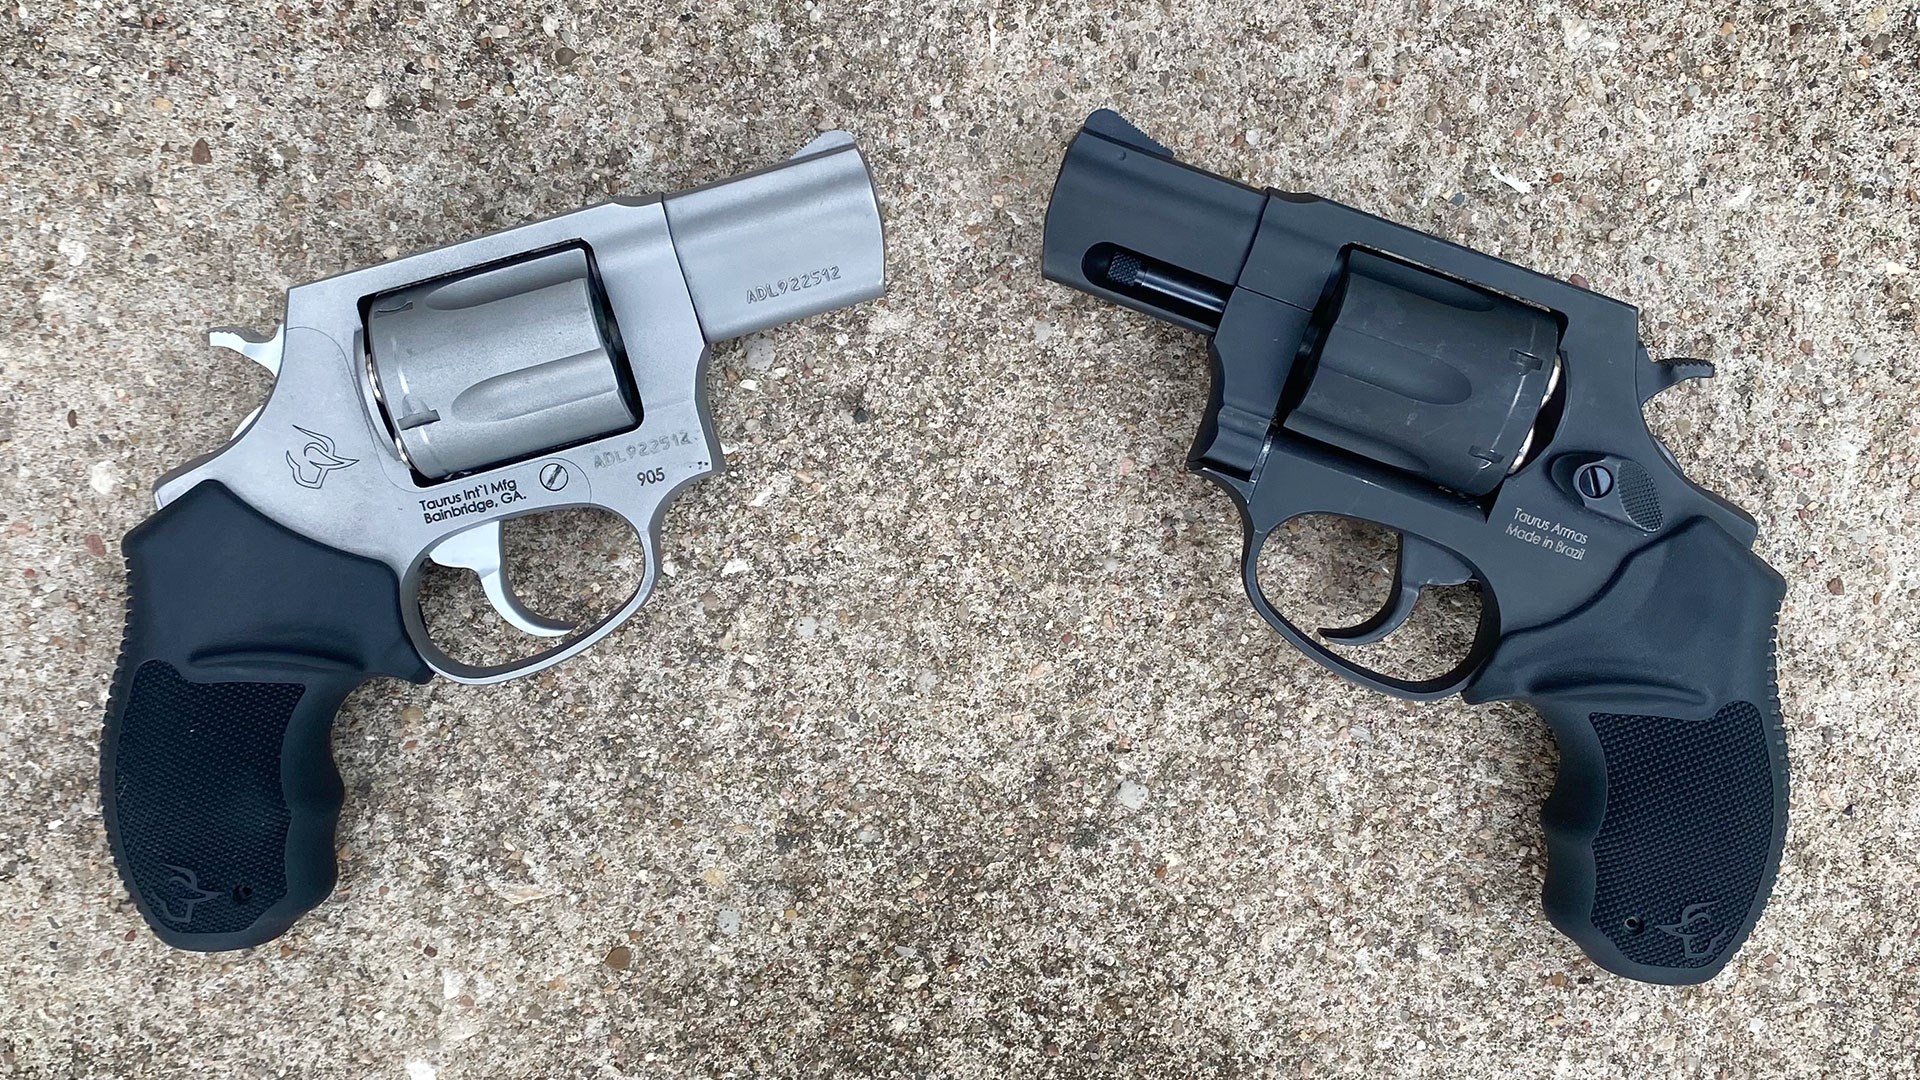 38 Special vs 9mm - Difference and Comparison